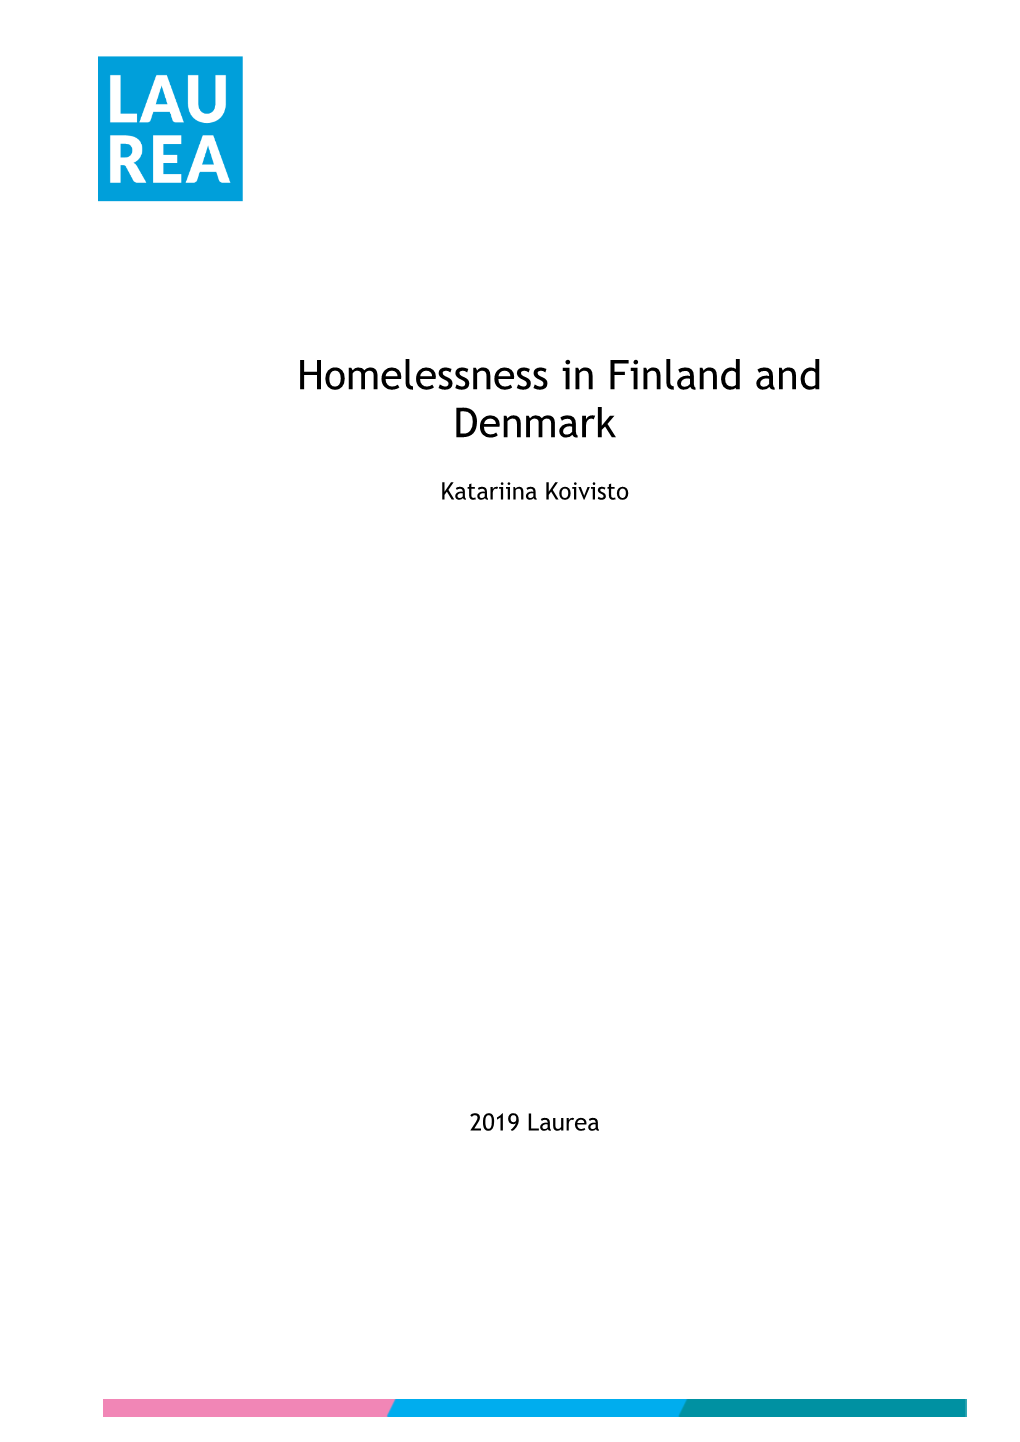 Homelessness in Finland and Denmark